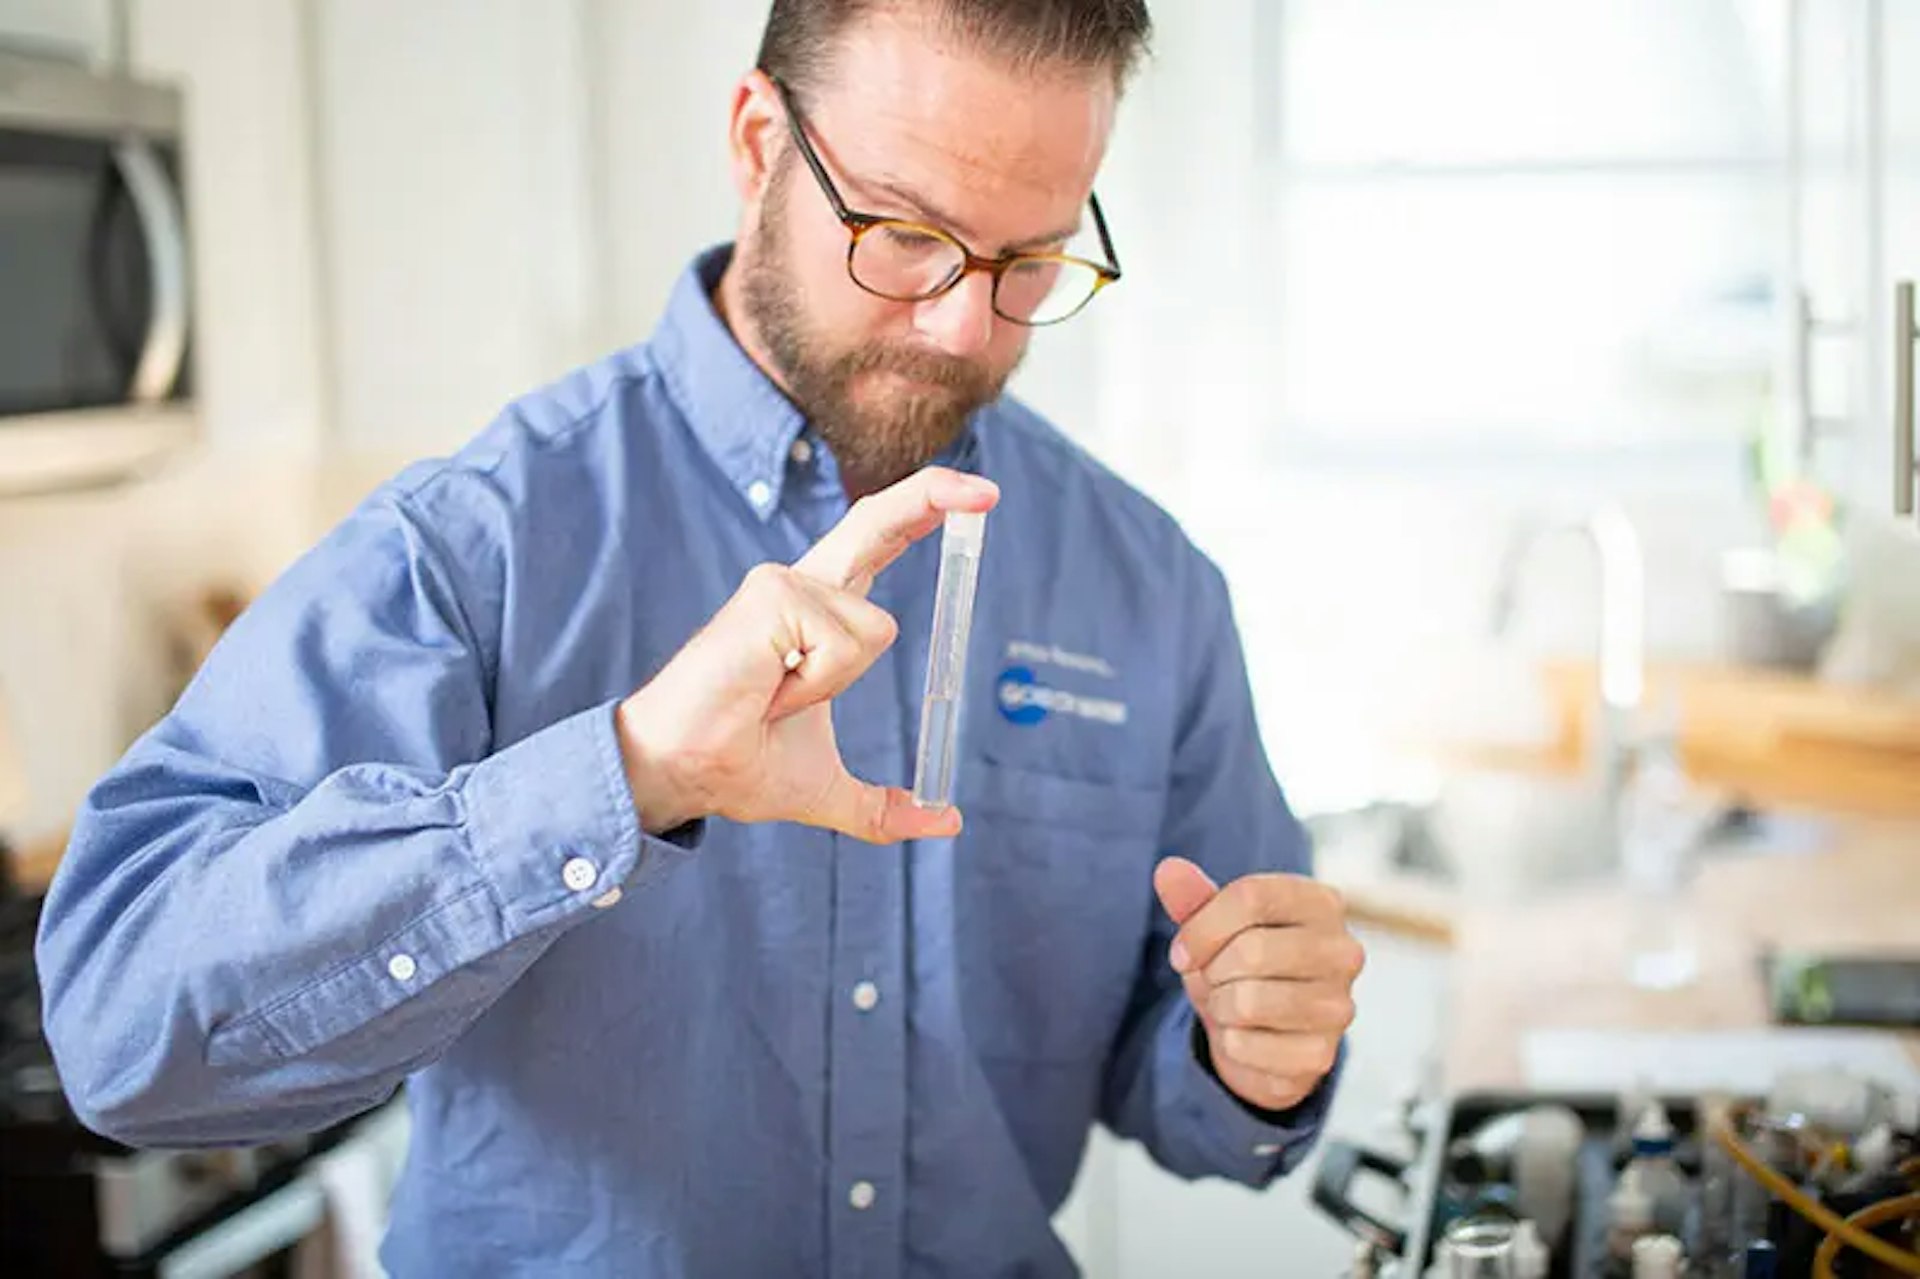 Water Specialist Ben Roper conducts a water test in a client’s home